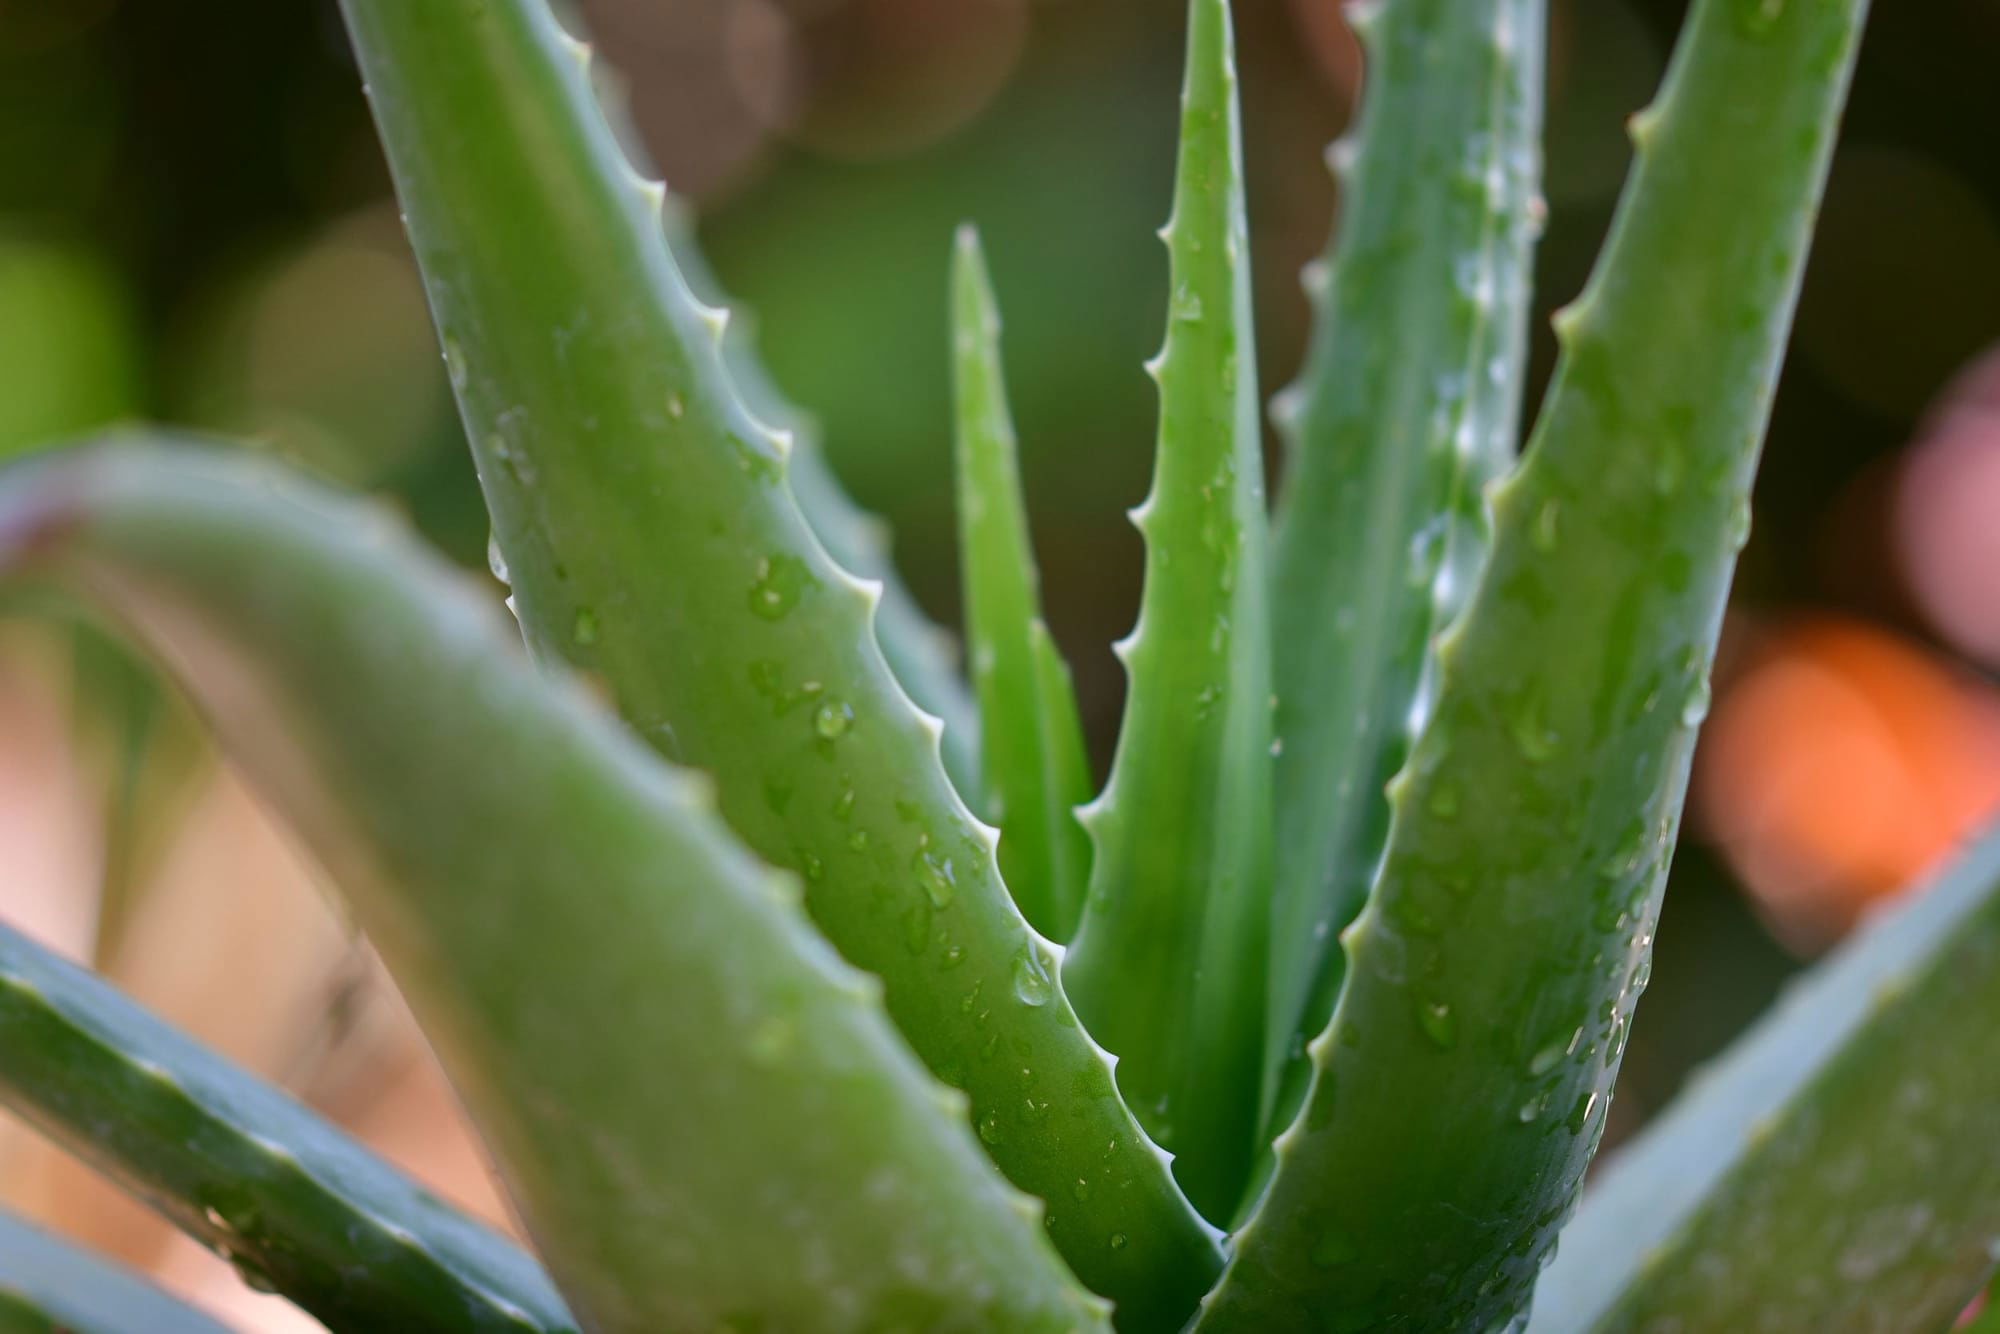 My secret recipe for making cooling and healing aloe vera patches